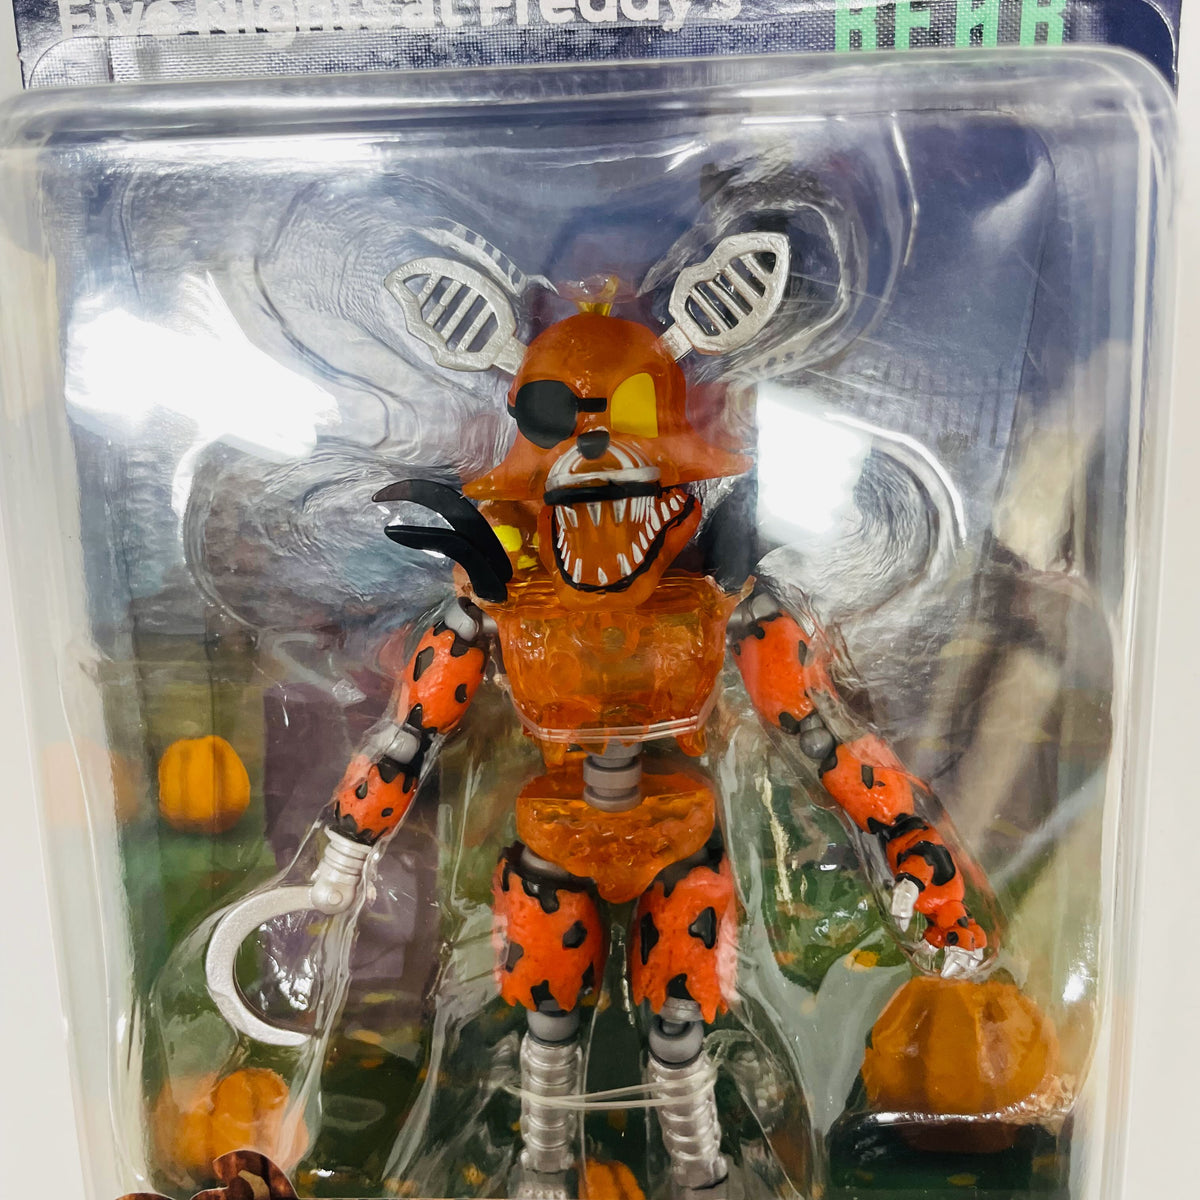 Five Nights at Freddy's: Grimm Foxy action figure (Funko)